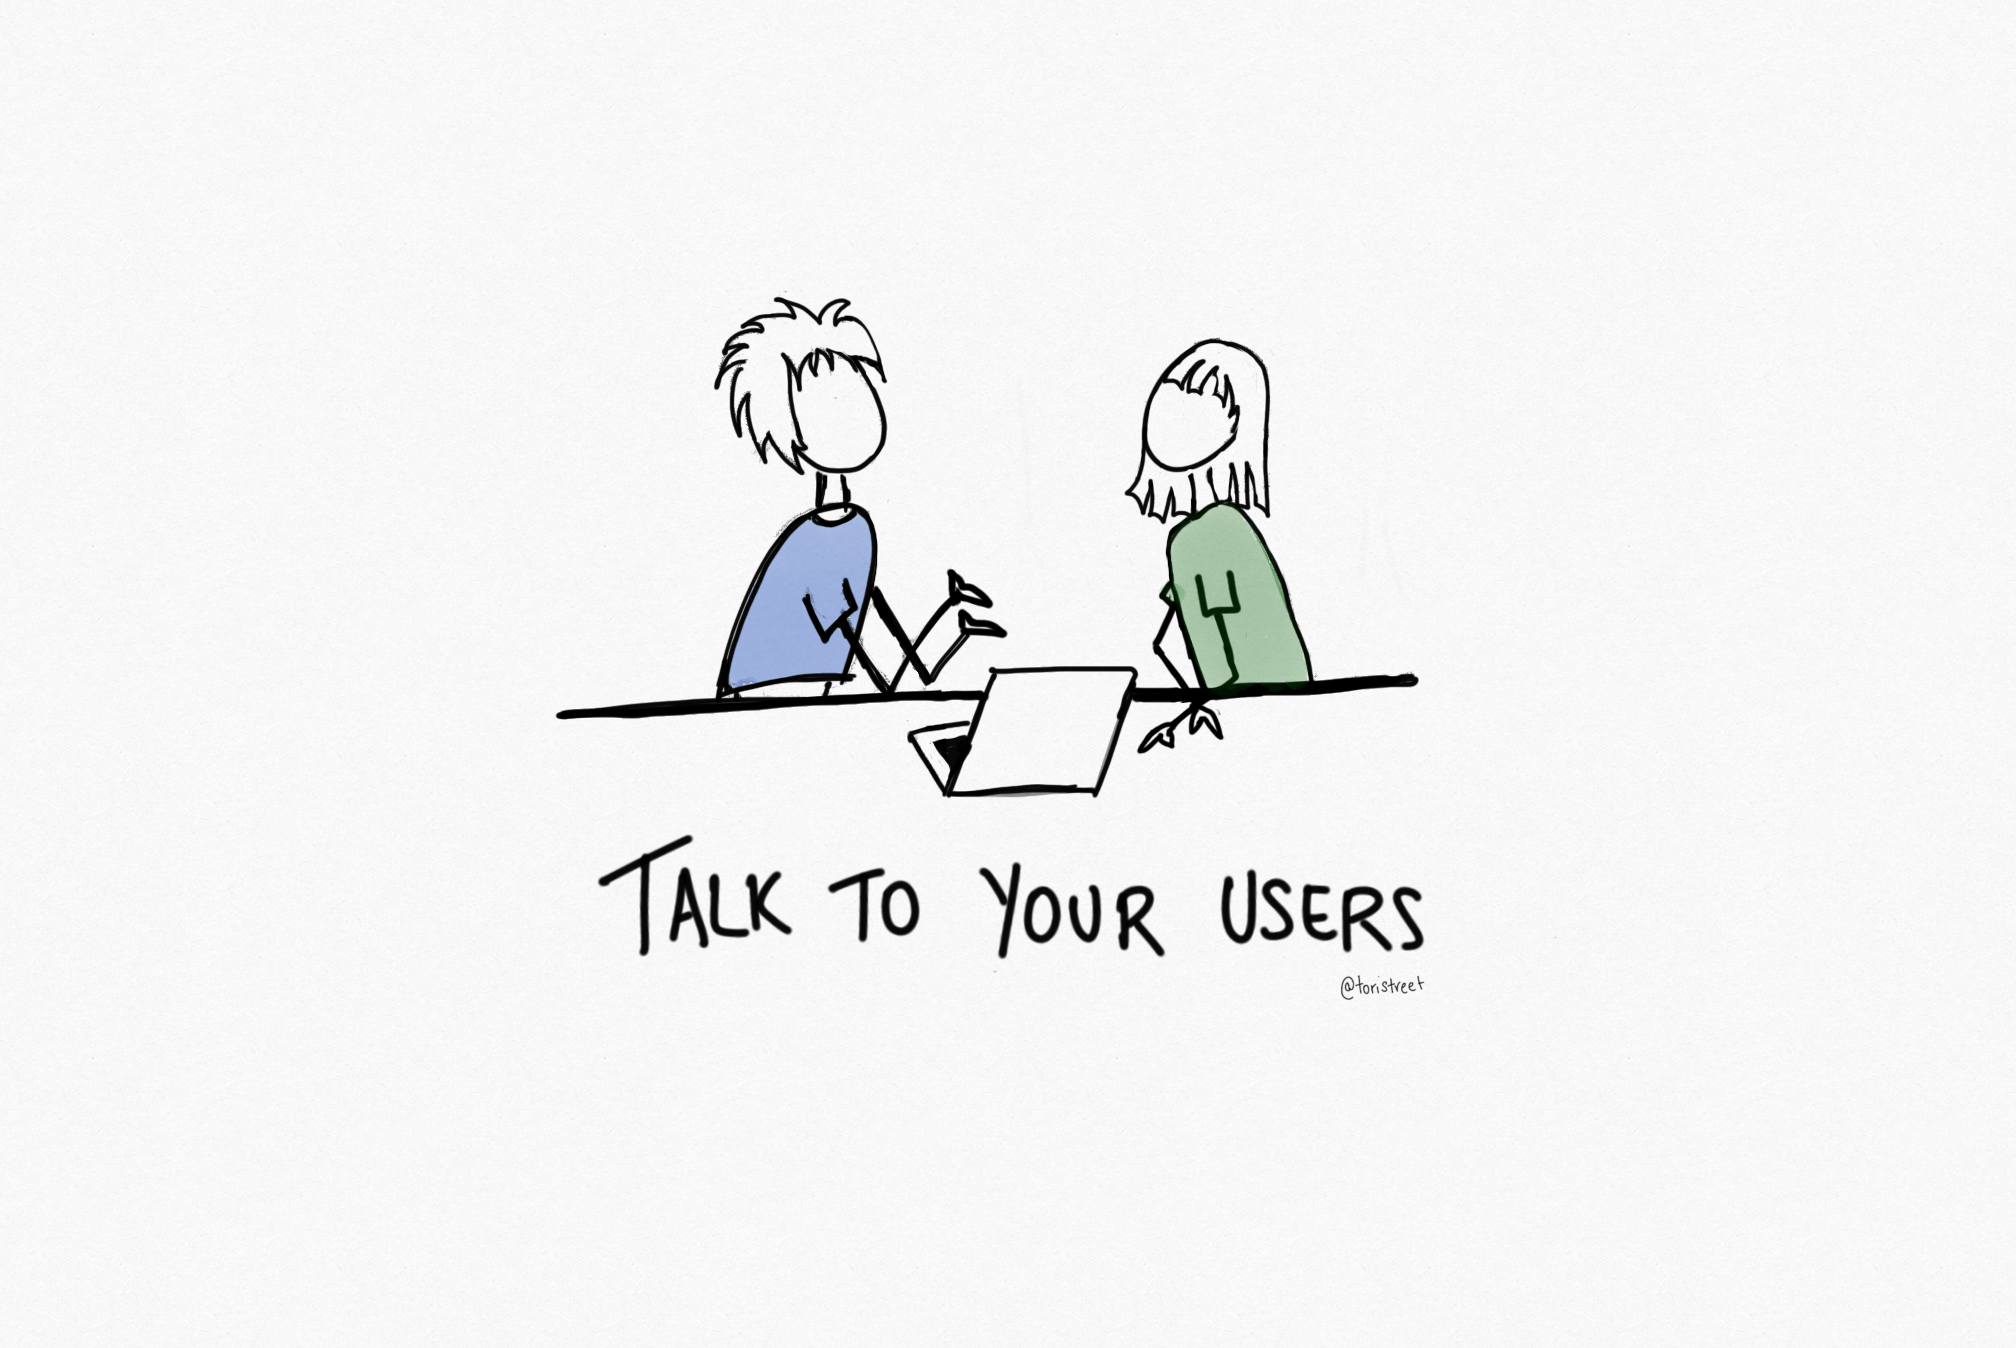 An abstract image saying talk to your users